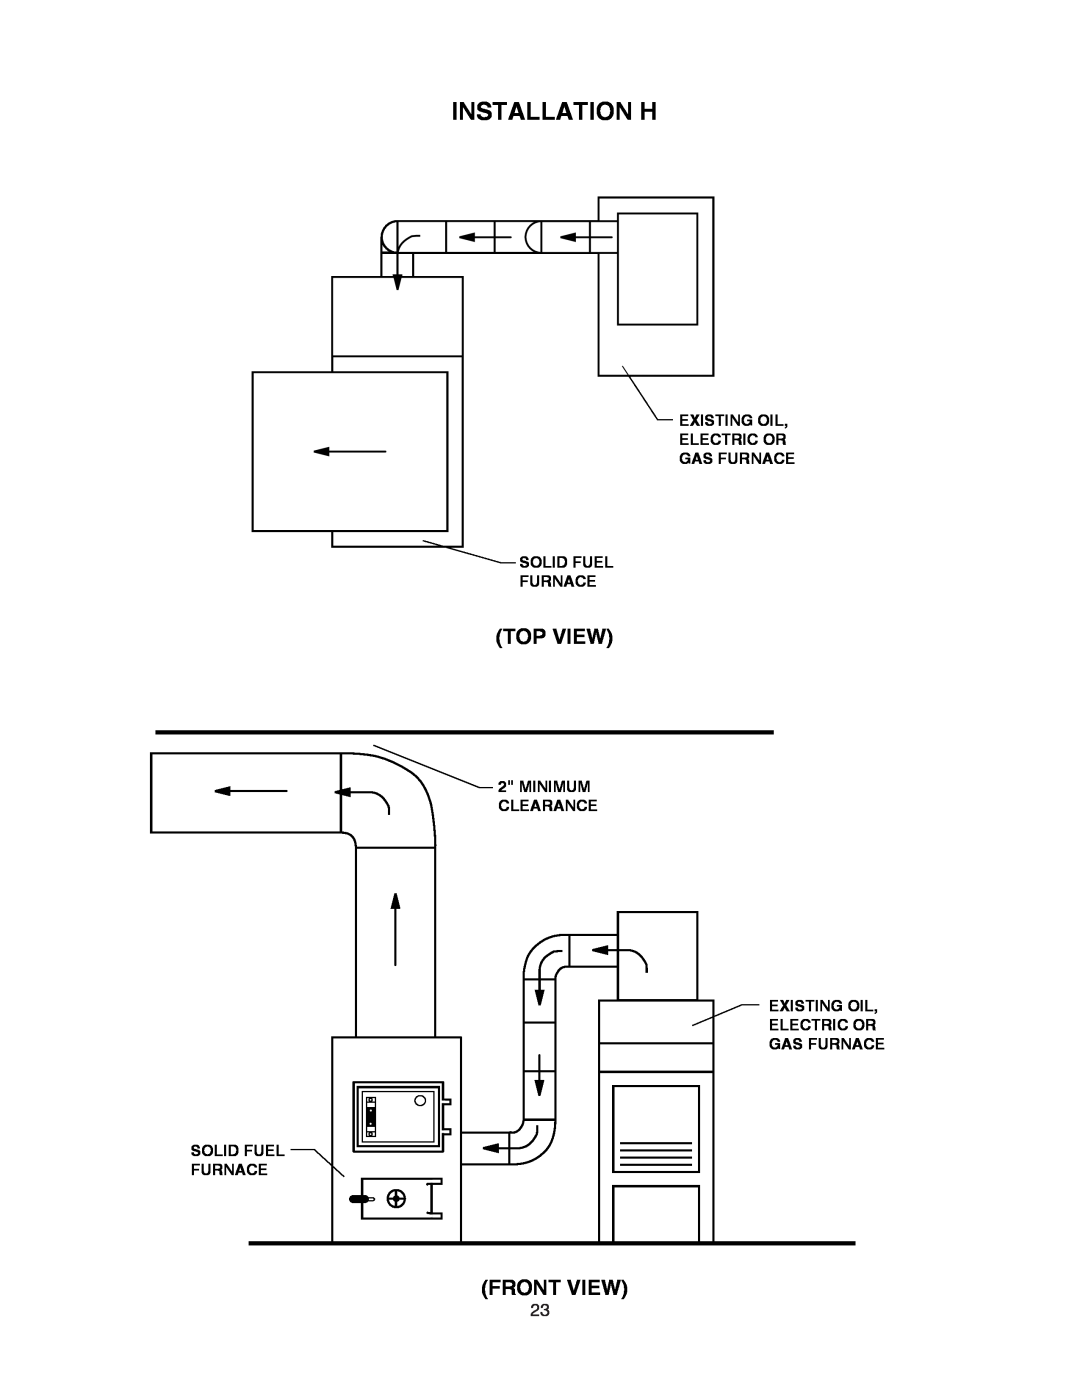 United States Stove 1500 owner manual Installation H, Top View, Front View 